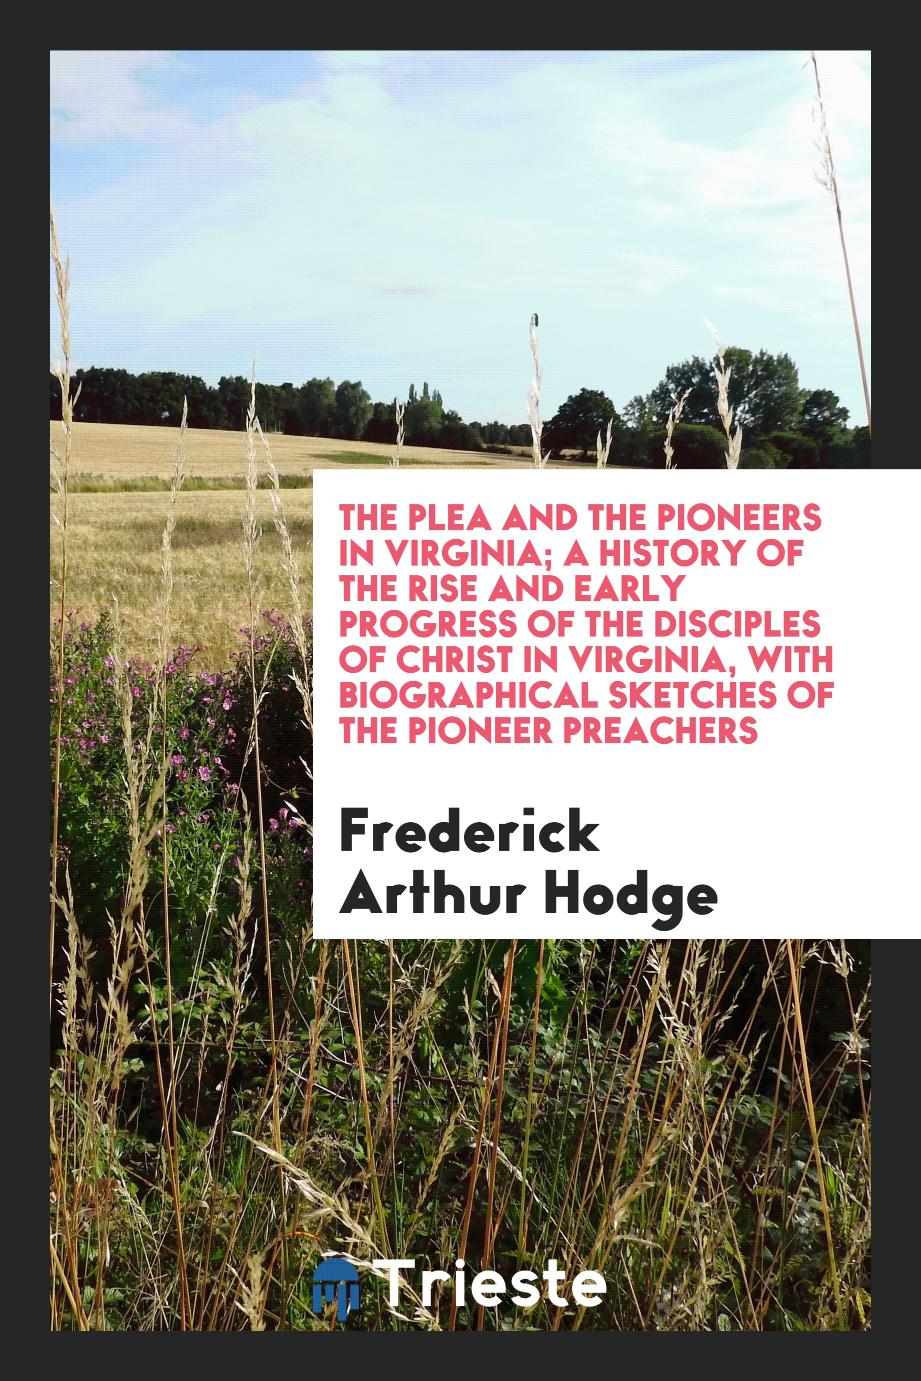 The plea and the pioneers in Virginia; a history of the rise and early progress of the Disciples of Christ in Virginia, with biographical sketches of the pioneer preachers